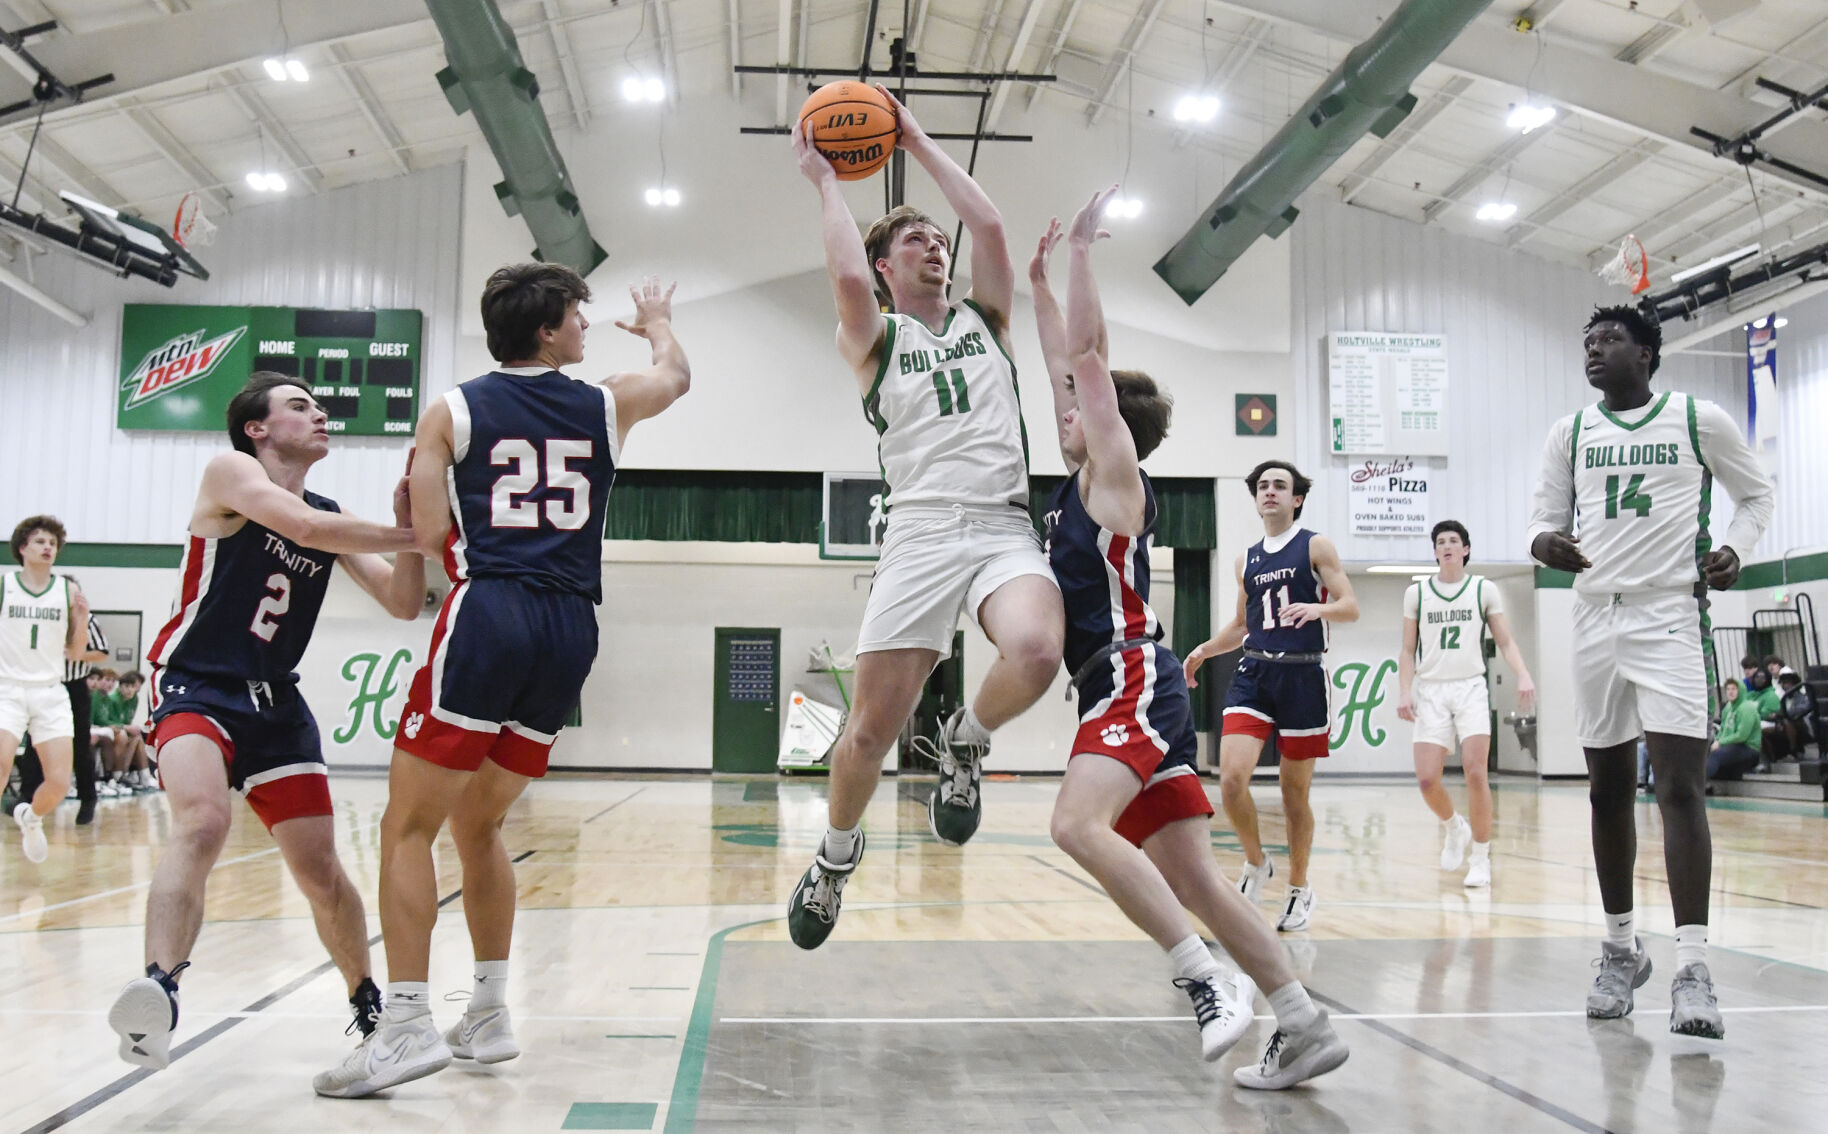 Trinity’s Dominant Second Half Secures 70-51 Victory Over Holtville in High School Boys’ Basketball Matchup